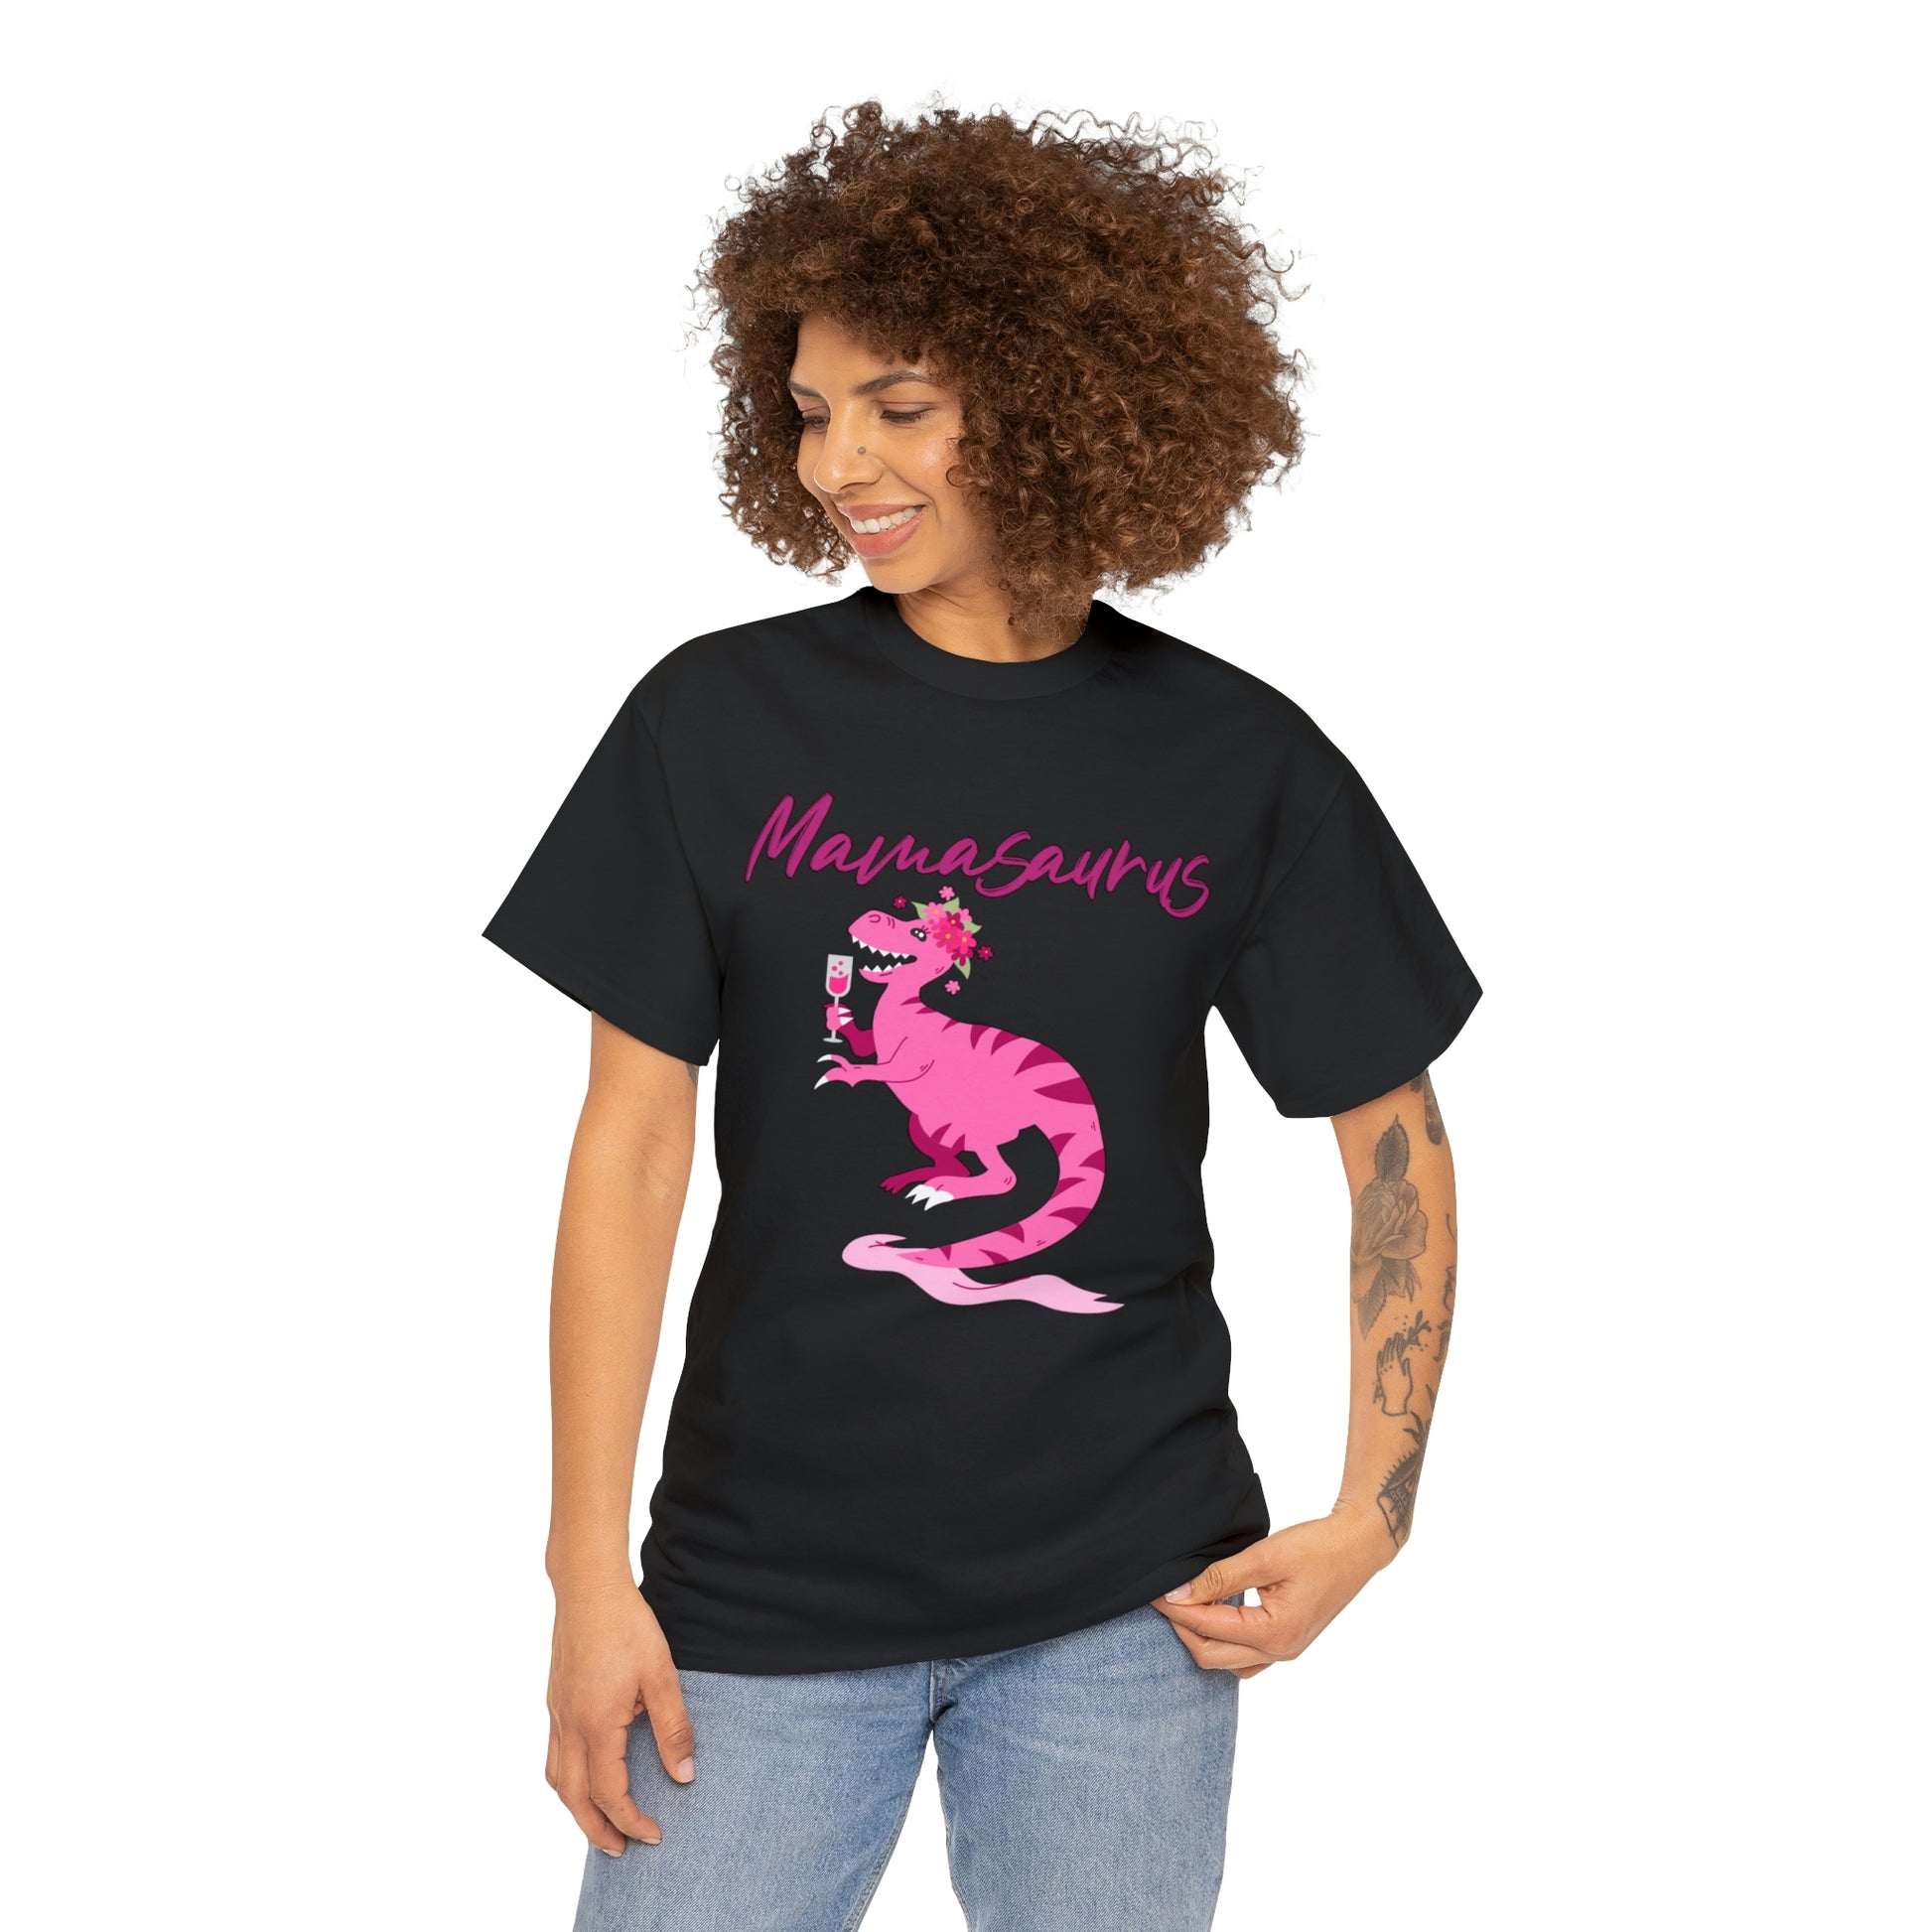 Mock up of the Black t-shirt worn by a girl with curly hair